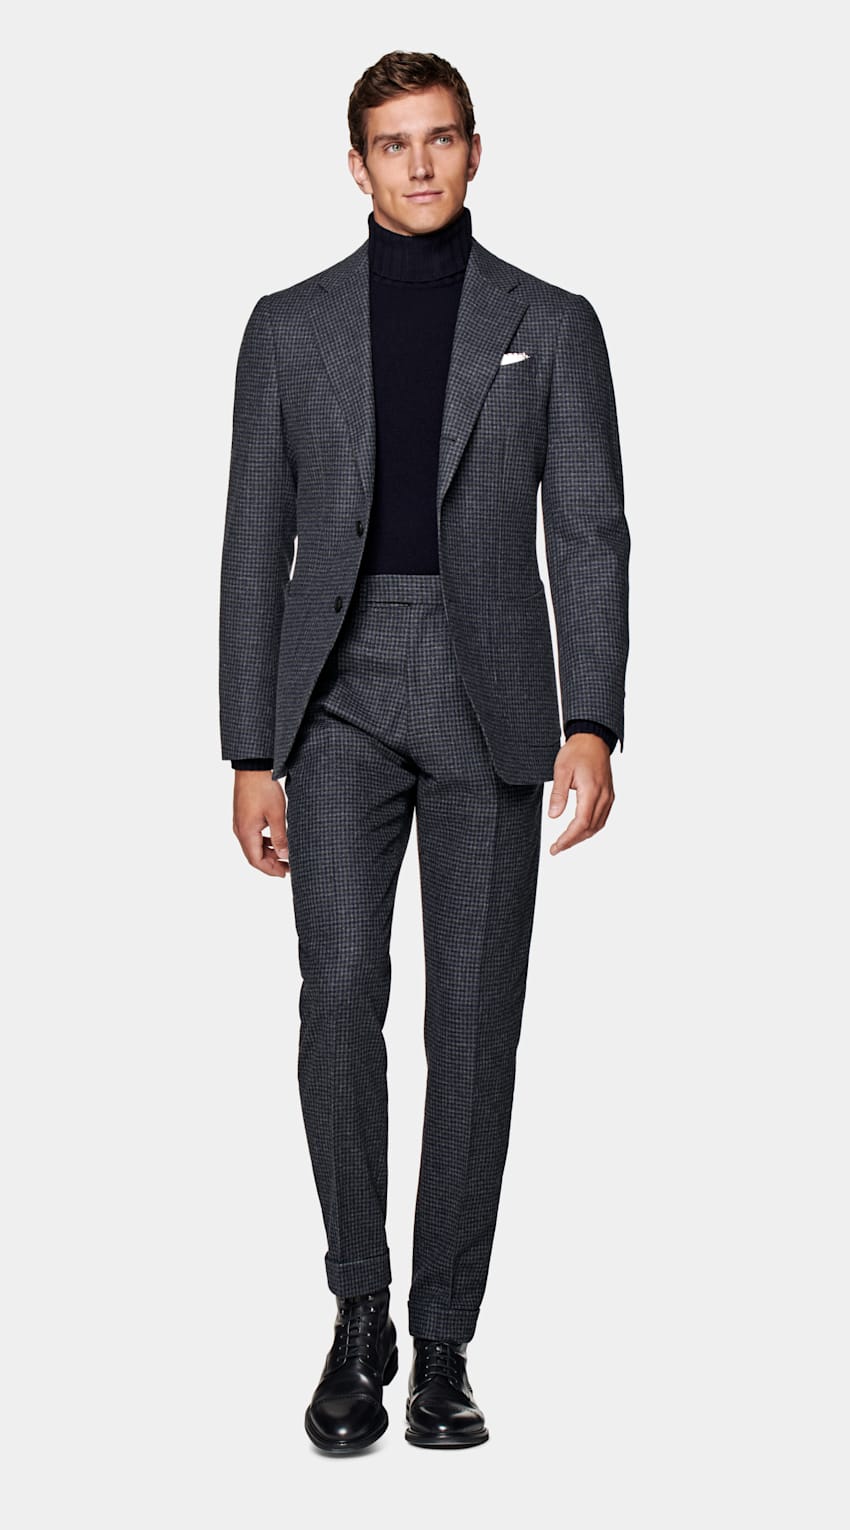 SUITSUPPLY Wool Cashmere by E.Thomas, Italy Dark Grey Check Havana Suit